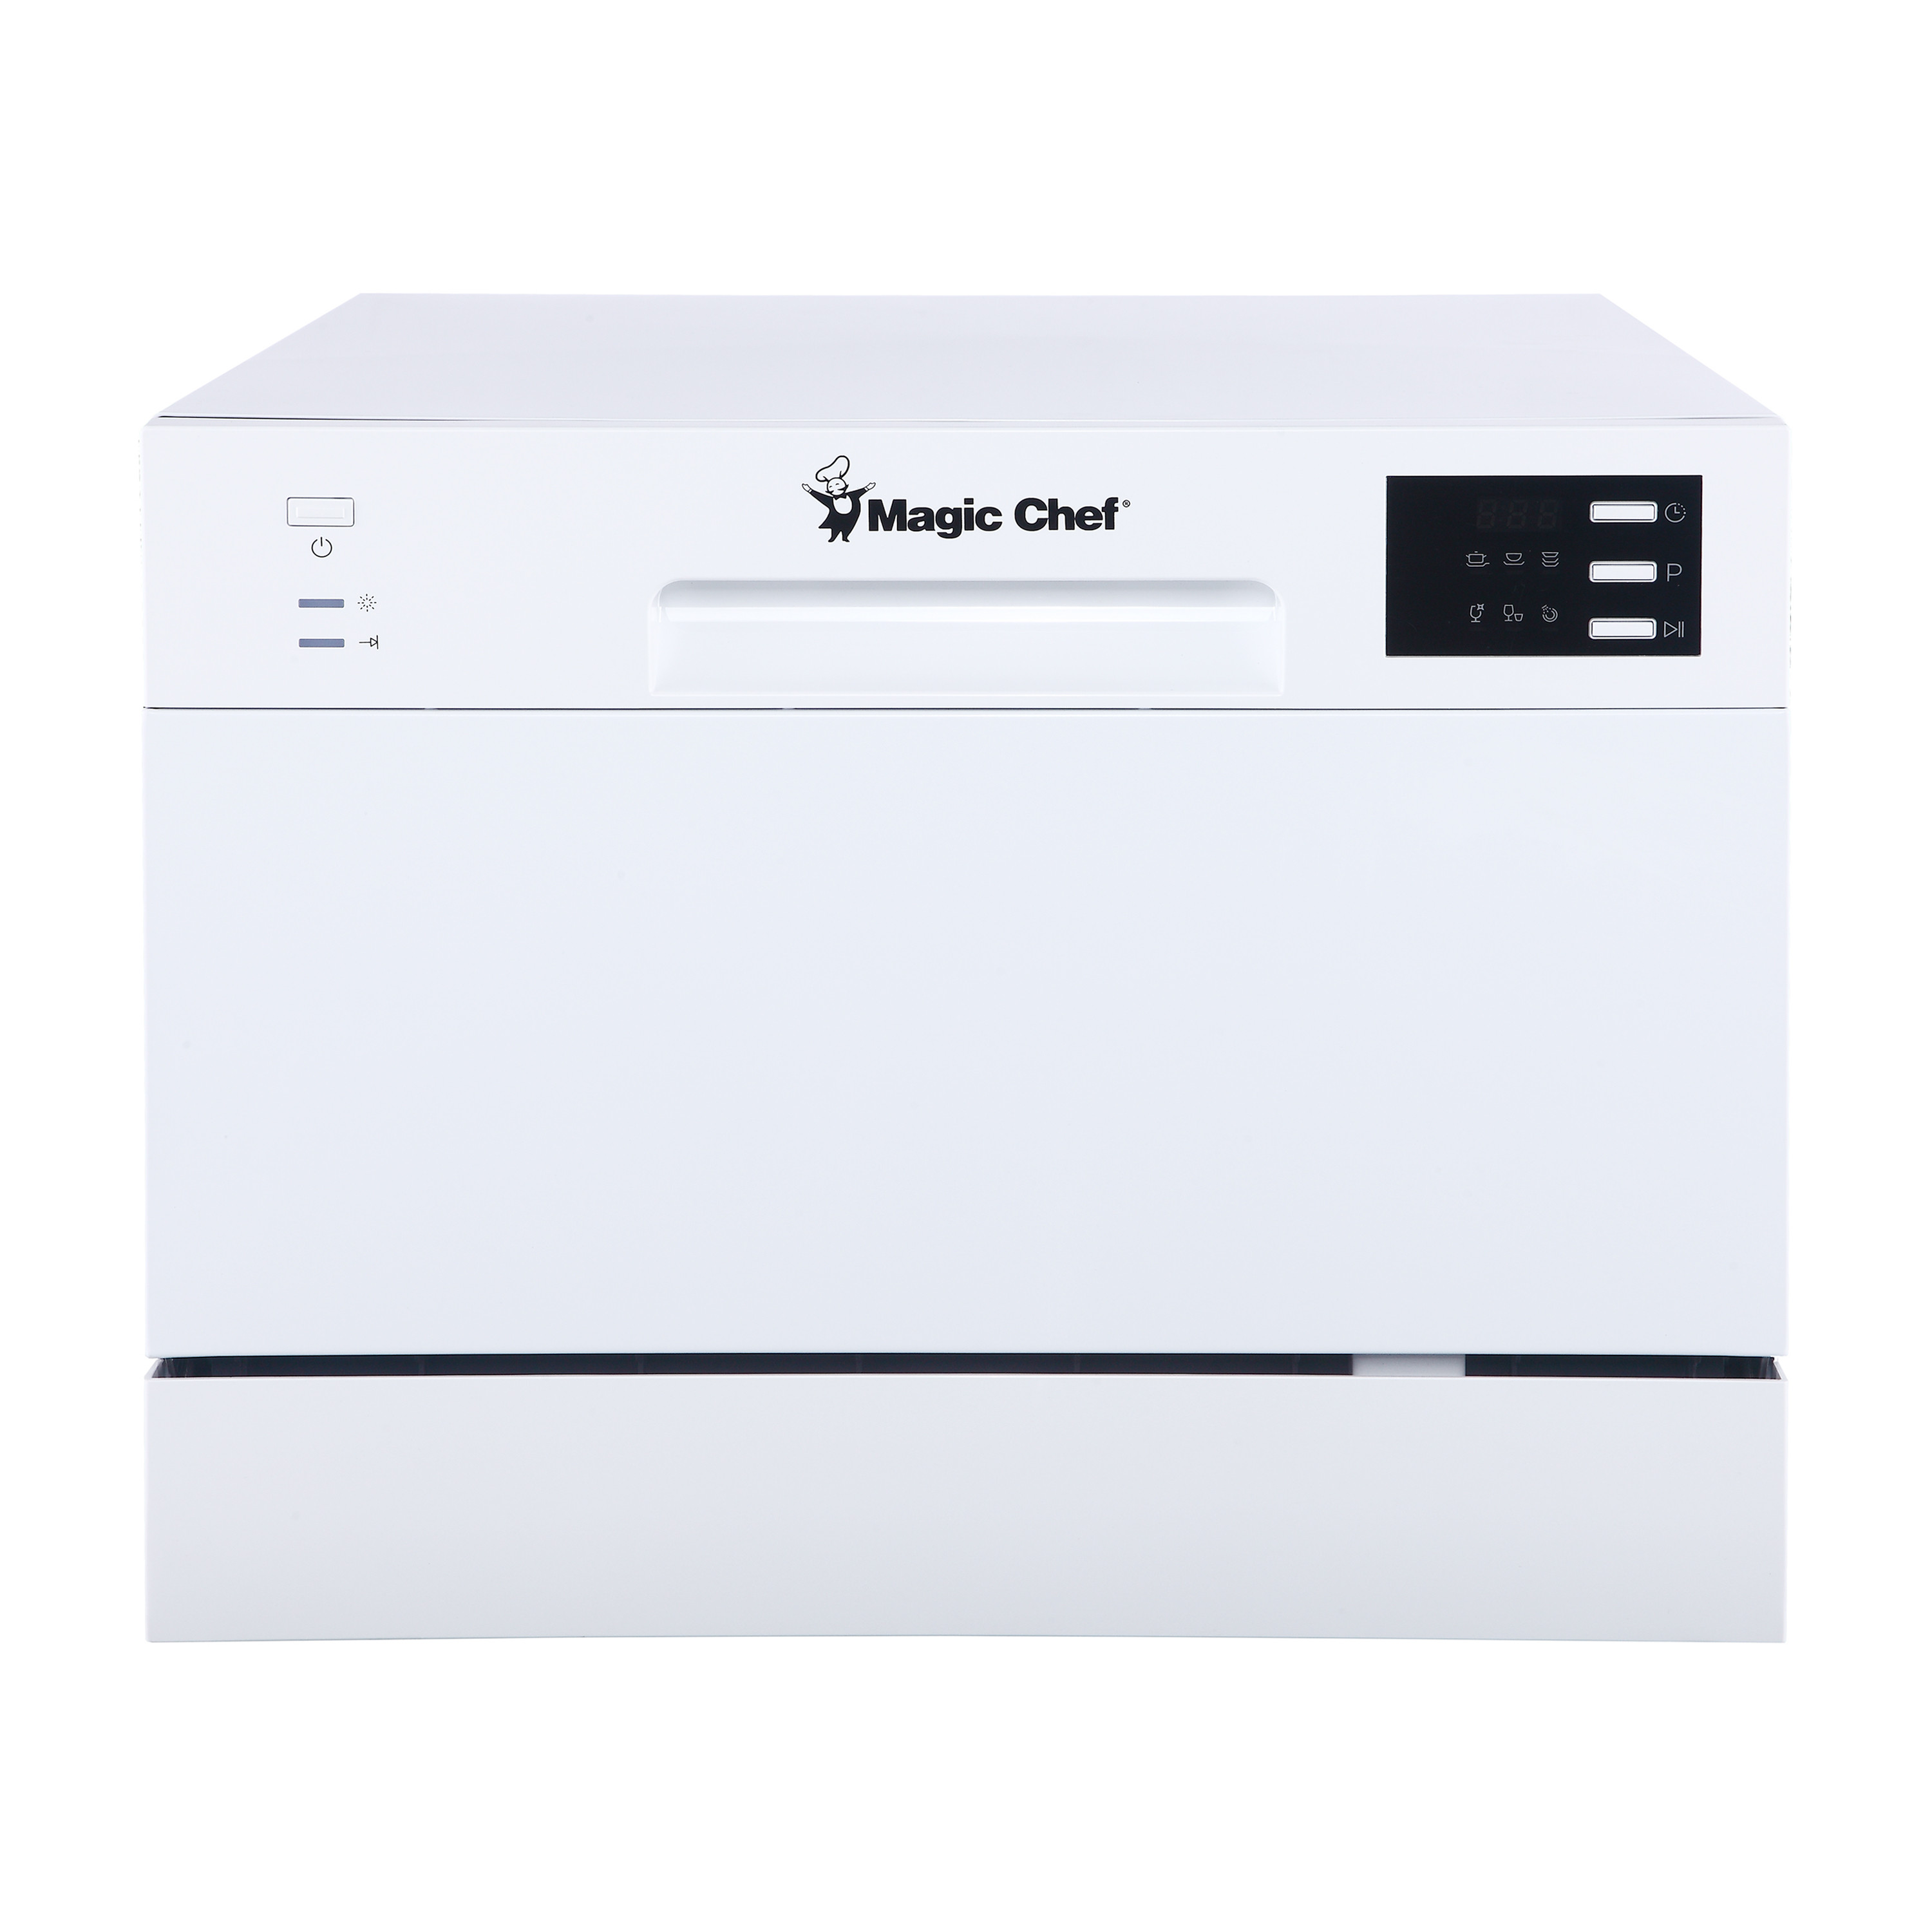 Magic Chef 6 Place Setting Countertop Portable Dishwasher, White - image 1 of 7